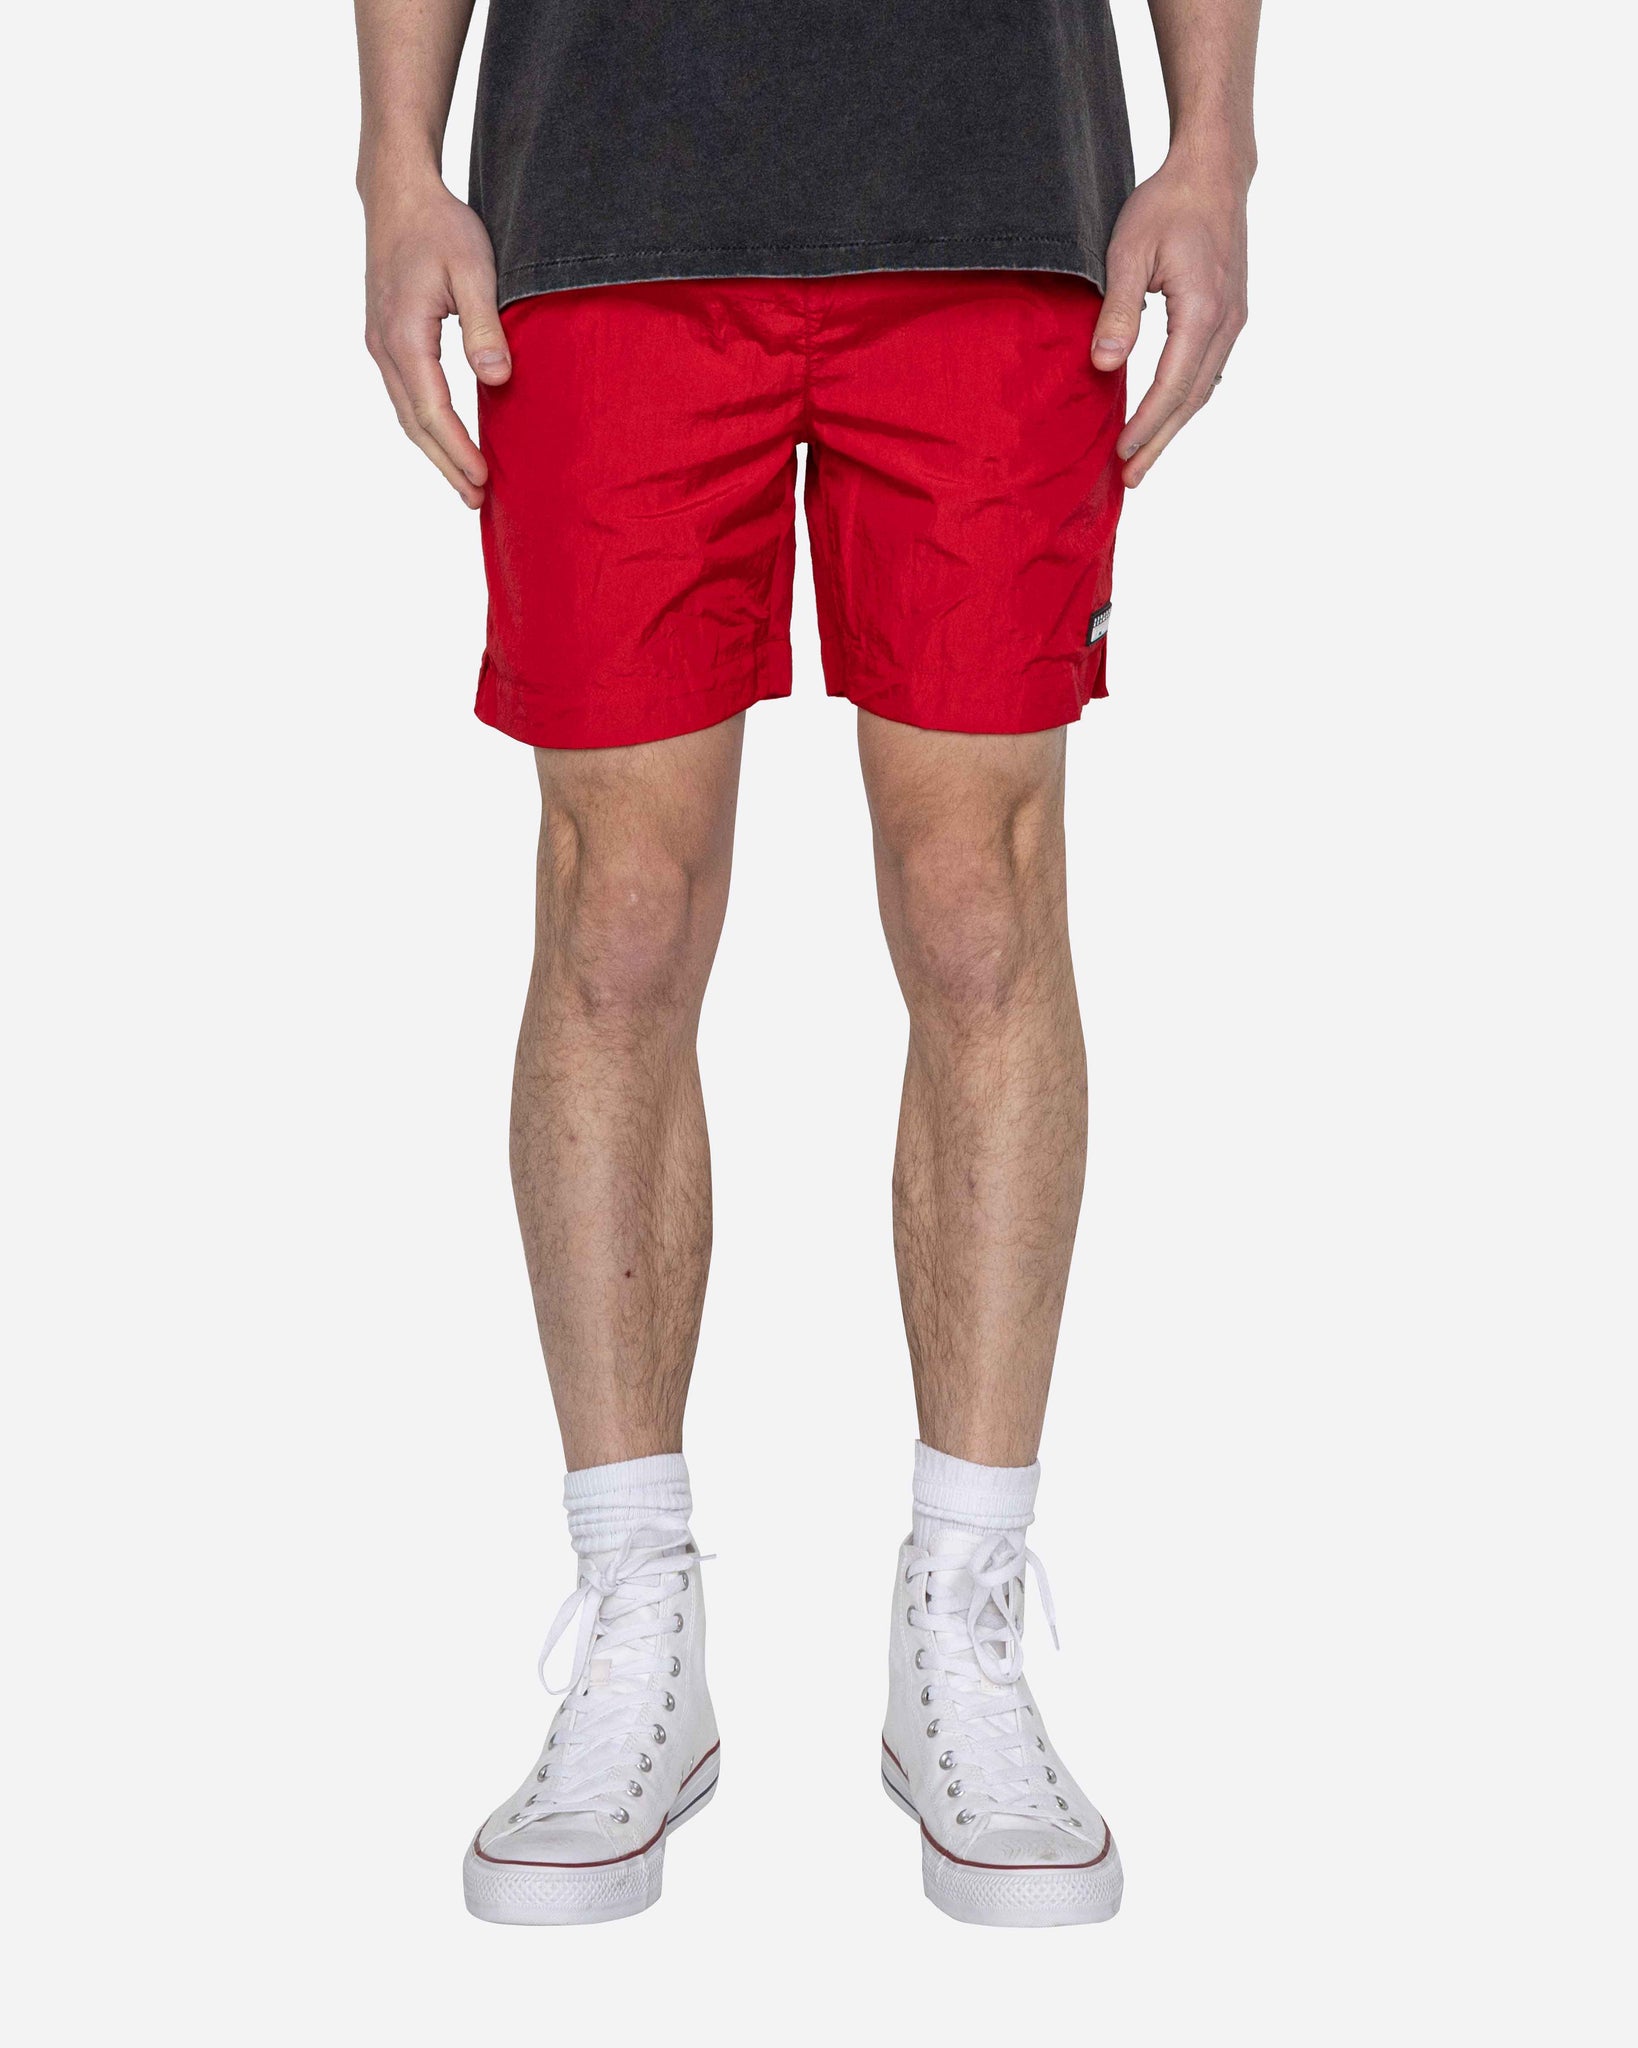 EPTM ALLOY SHORTS-RED